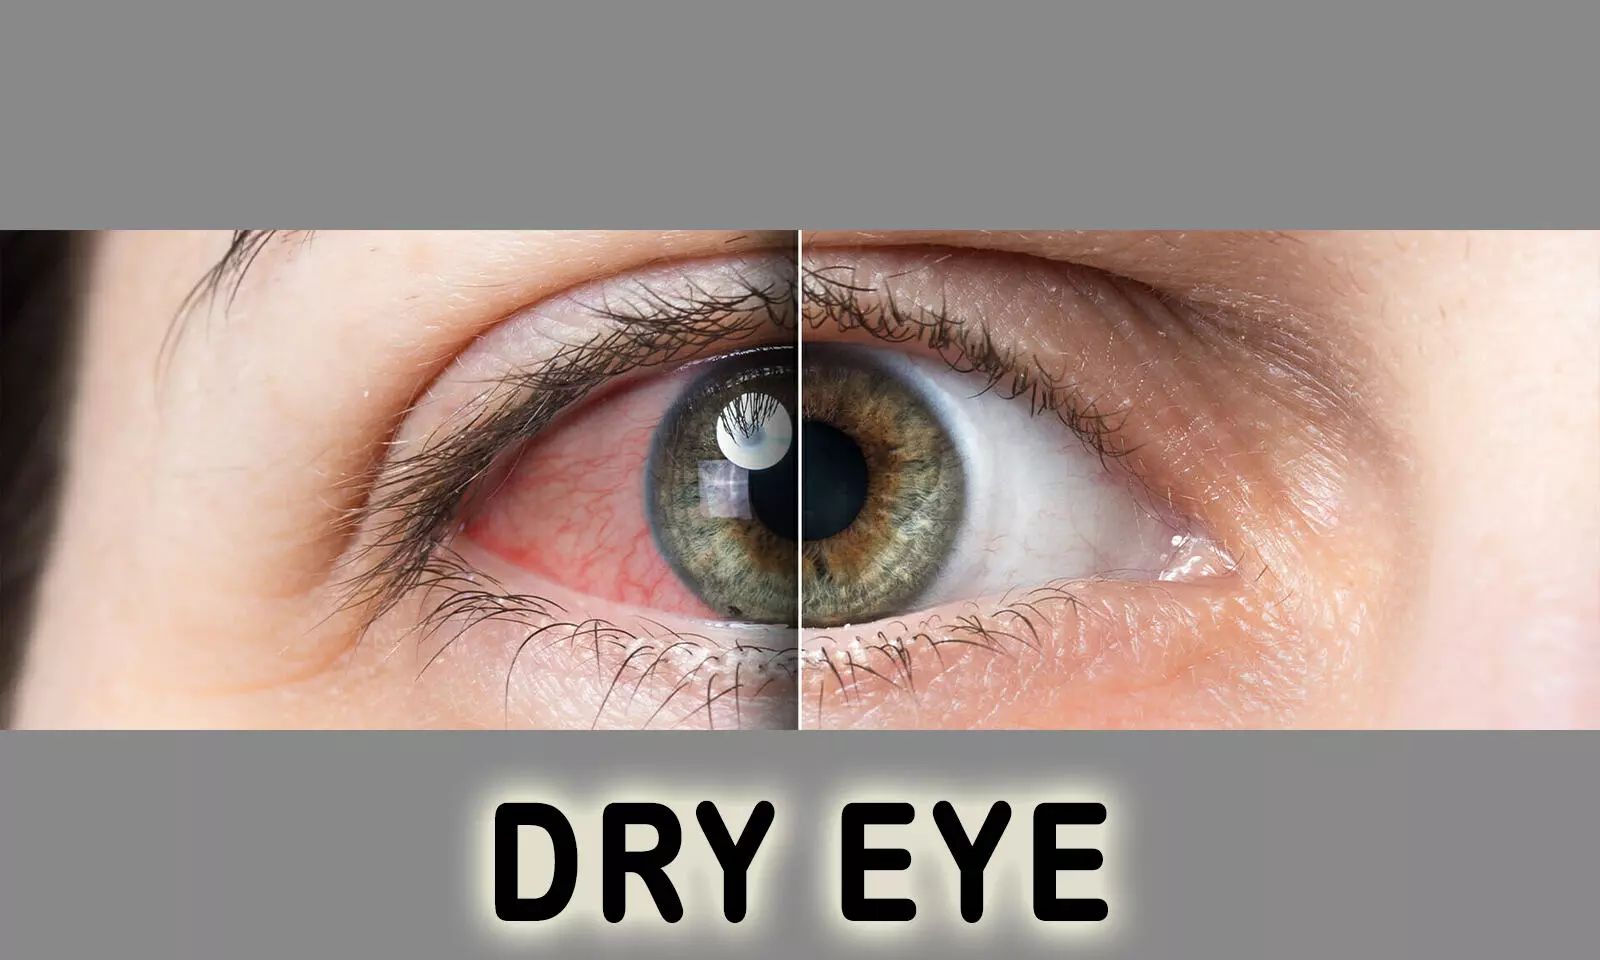 Low-Level Light and Intense Pulsed Light Therapy combo effective for Dry Eye in Sjogrens